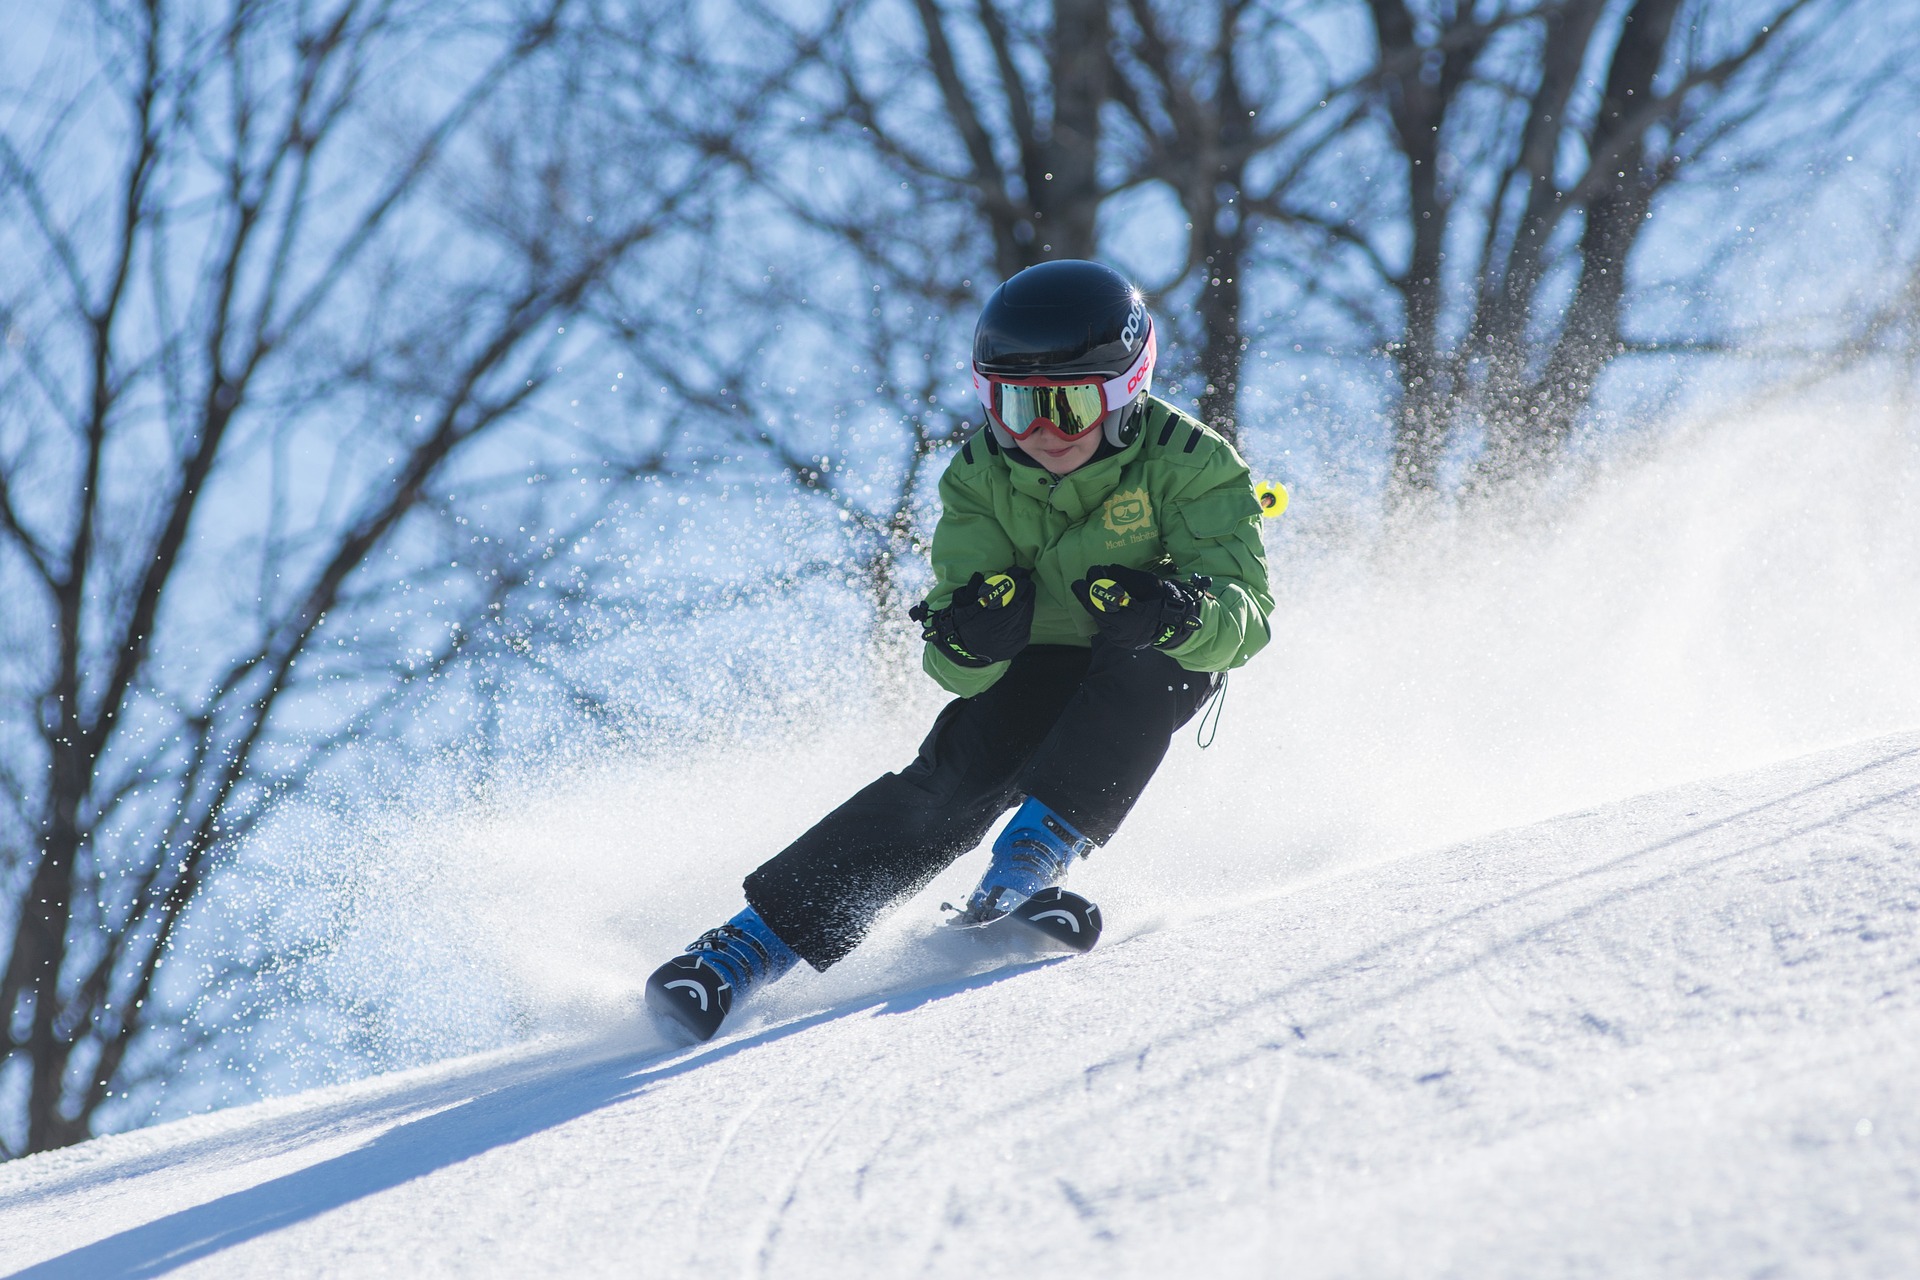 kid with green jacket skiing down a slope.